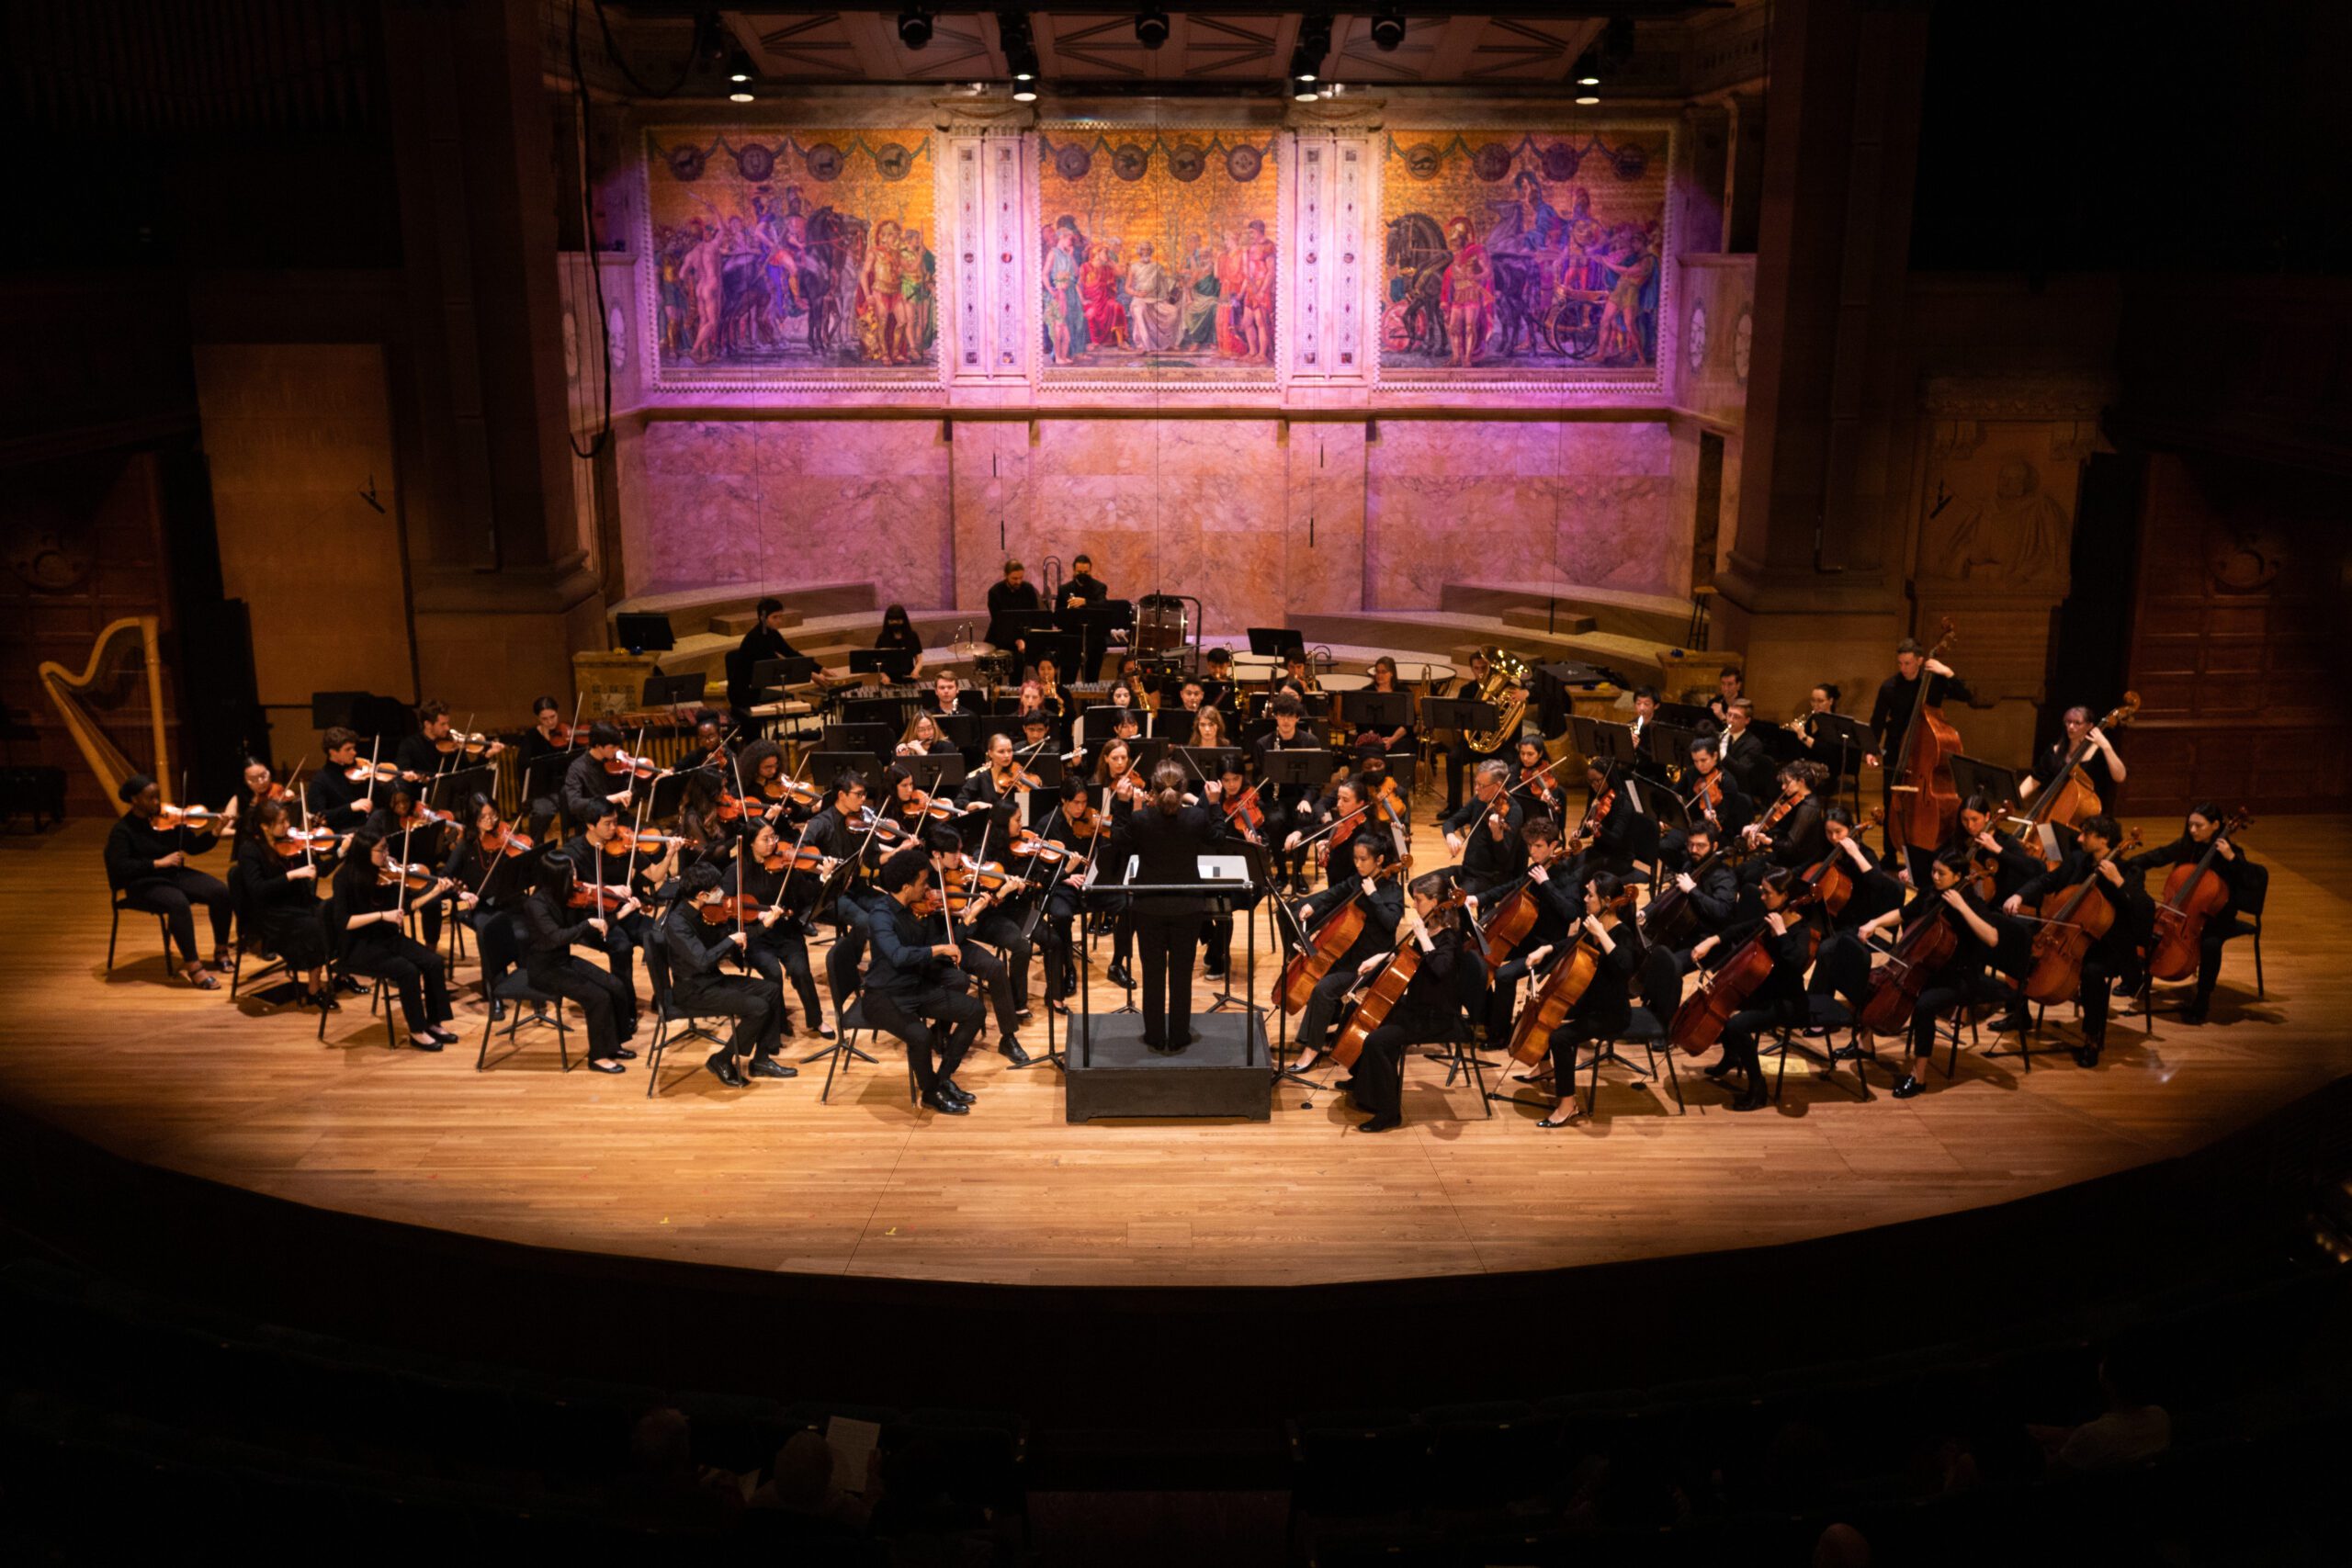 Many Sinfonia ensemble performers seated on a large stage, with their instruments